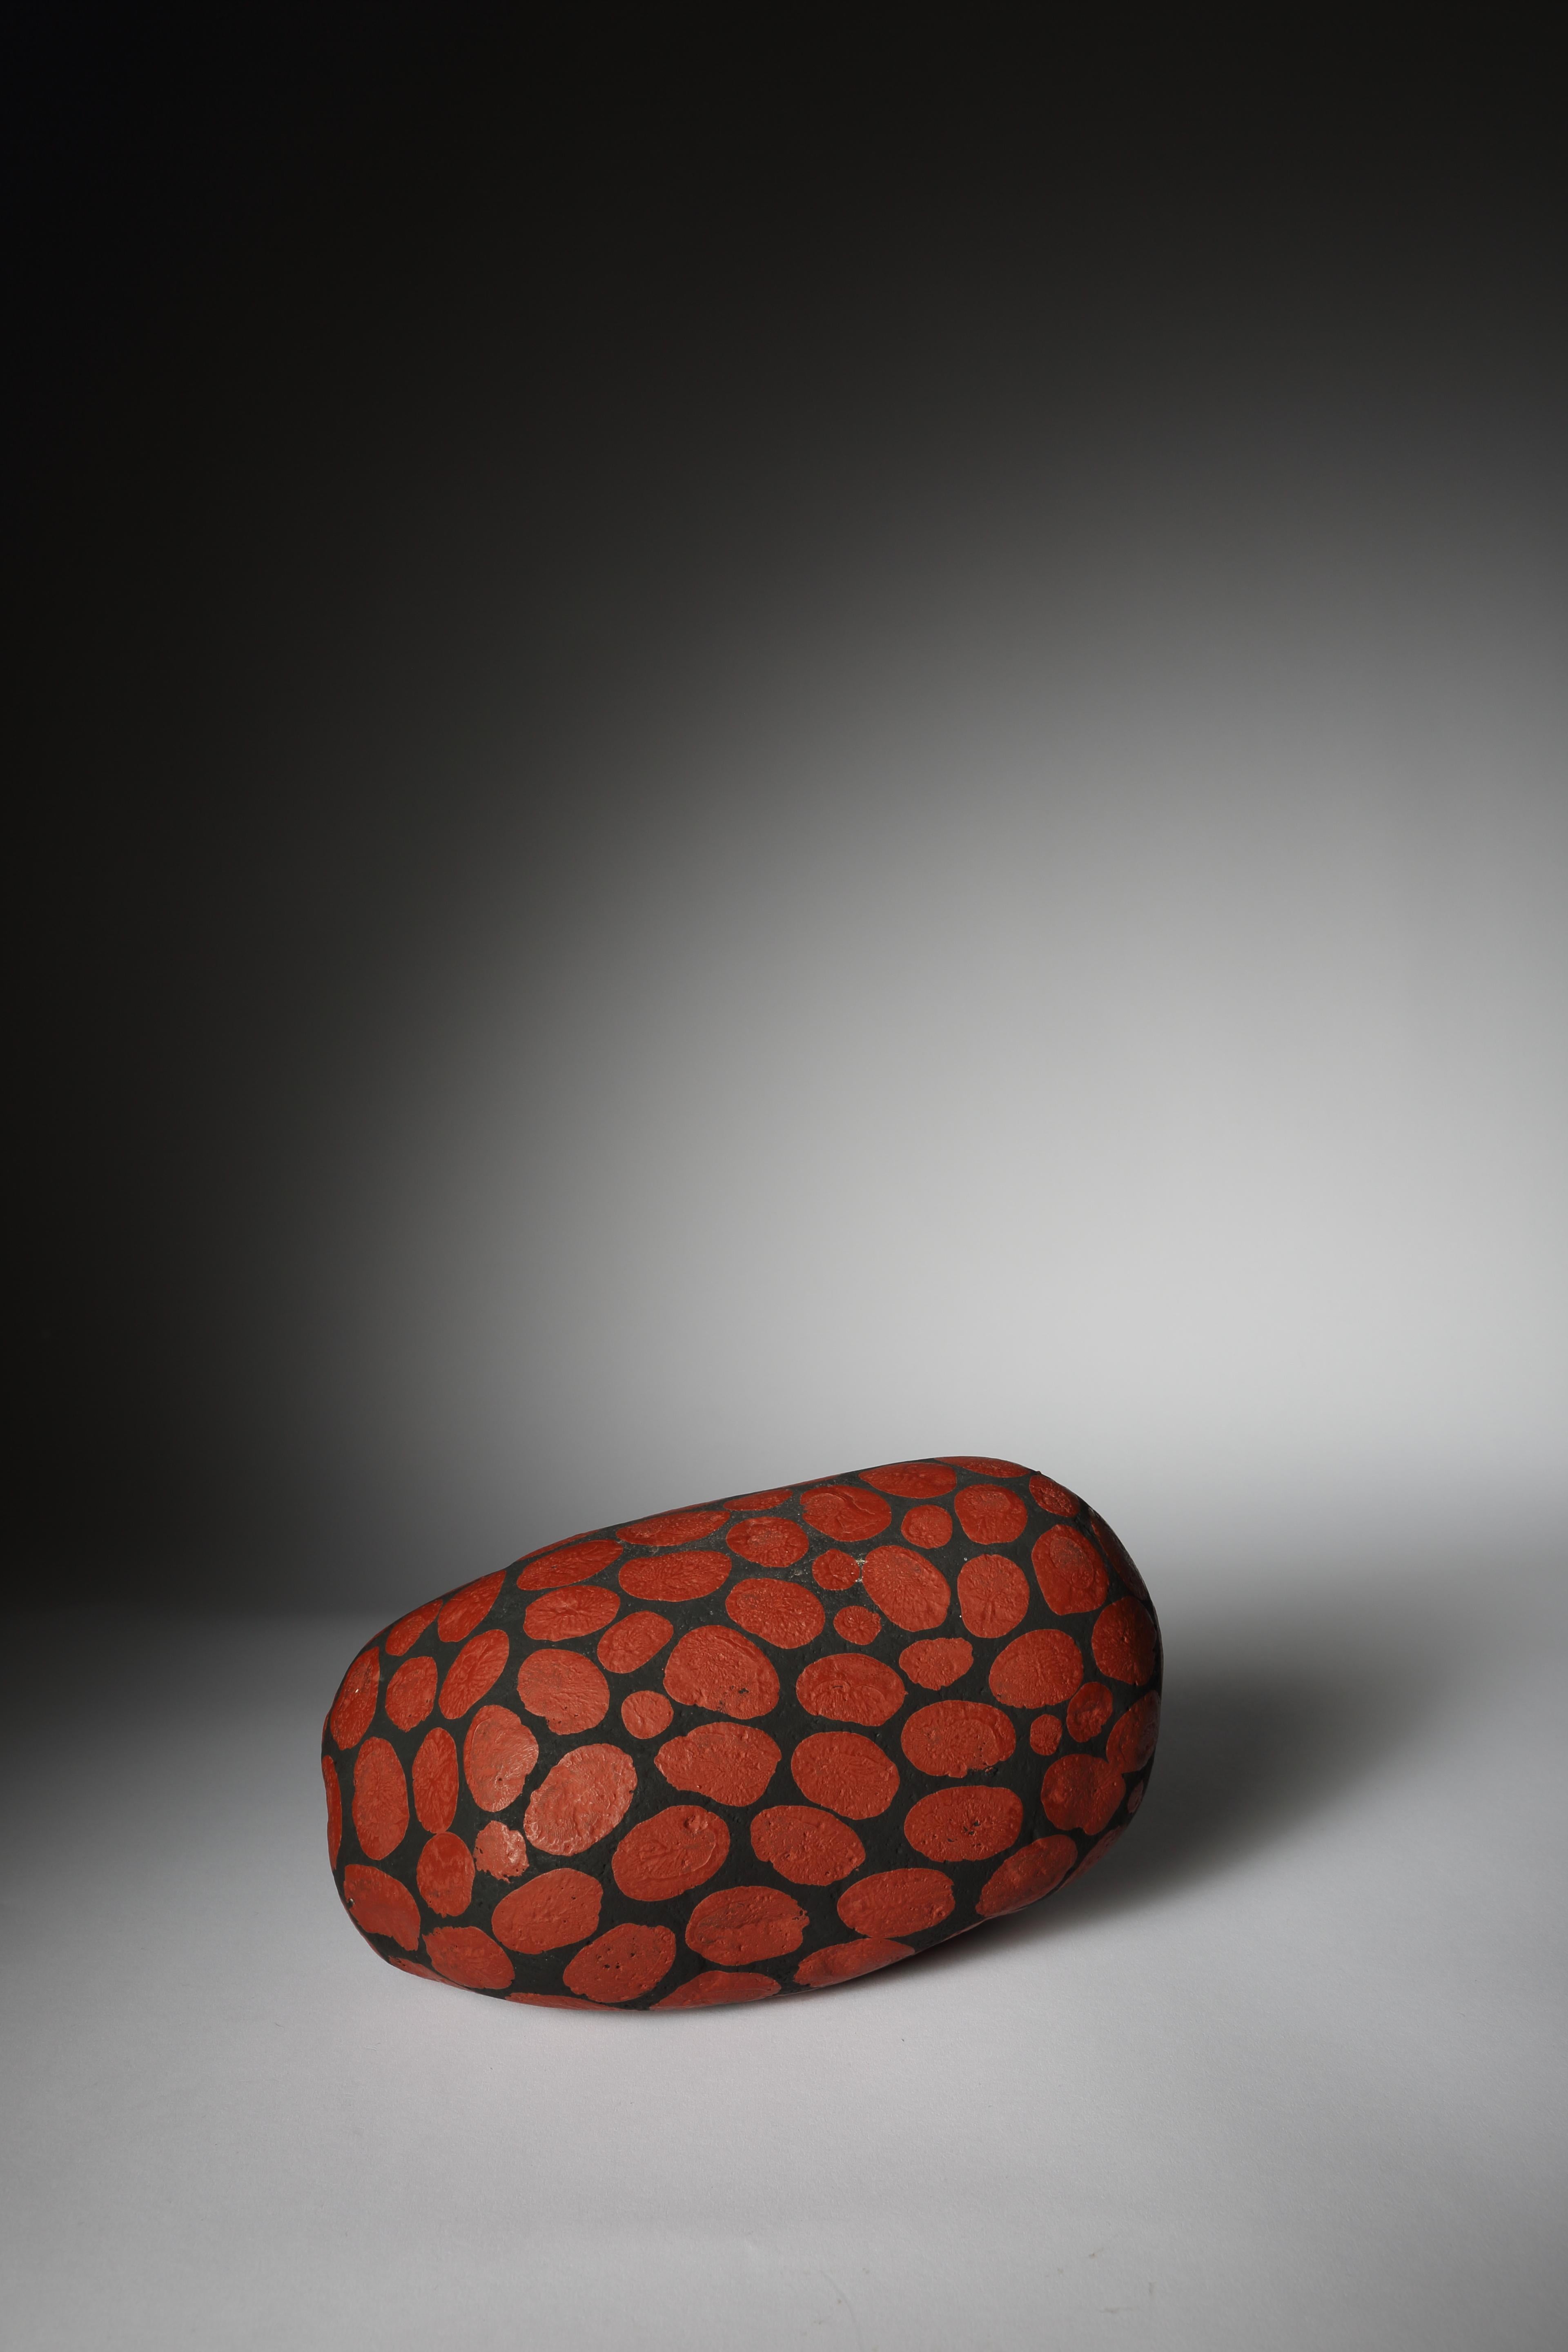 Painted Granite
Unique
Circa 2008

PROVENANCE
Mr R Warby Purchased 2014 Pangolin Gallery London

Peter Randall-Page b. 1954
Peter was born in Essex and studied at the Bath Academy of Art 1973 – 7. Barry Flanagan helped to take down his graduation